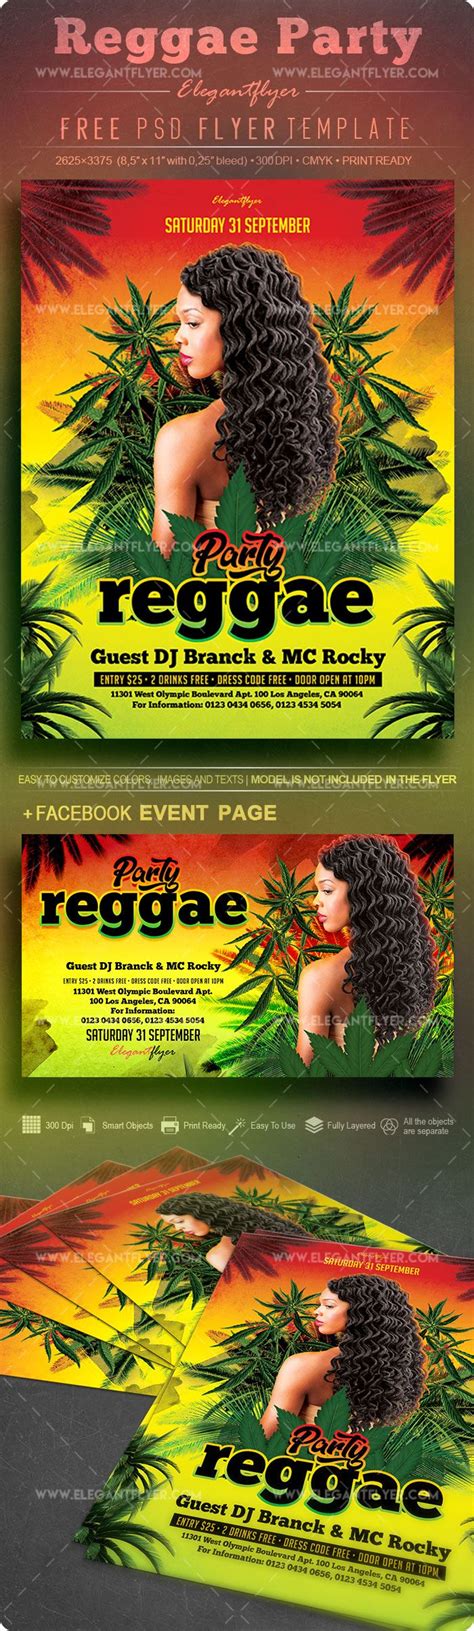 reggae party free flyer psd template free psd flyer free flyer templates party flyer party